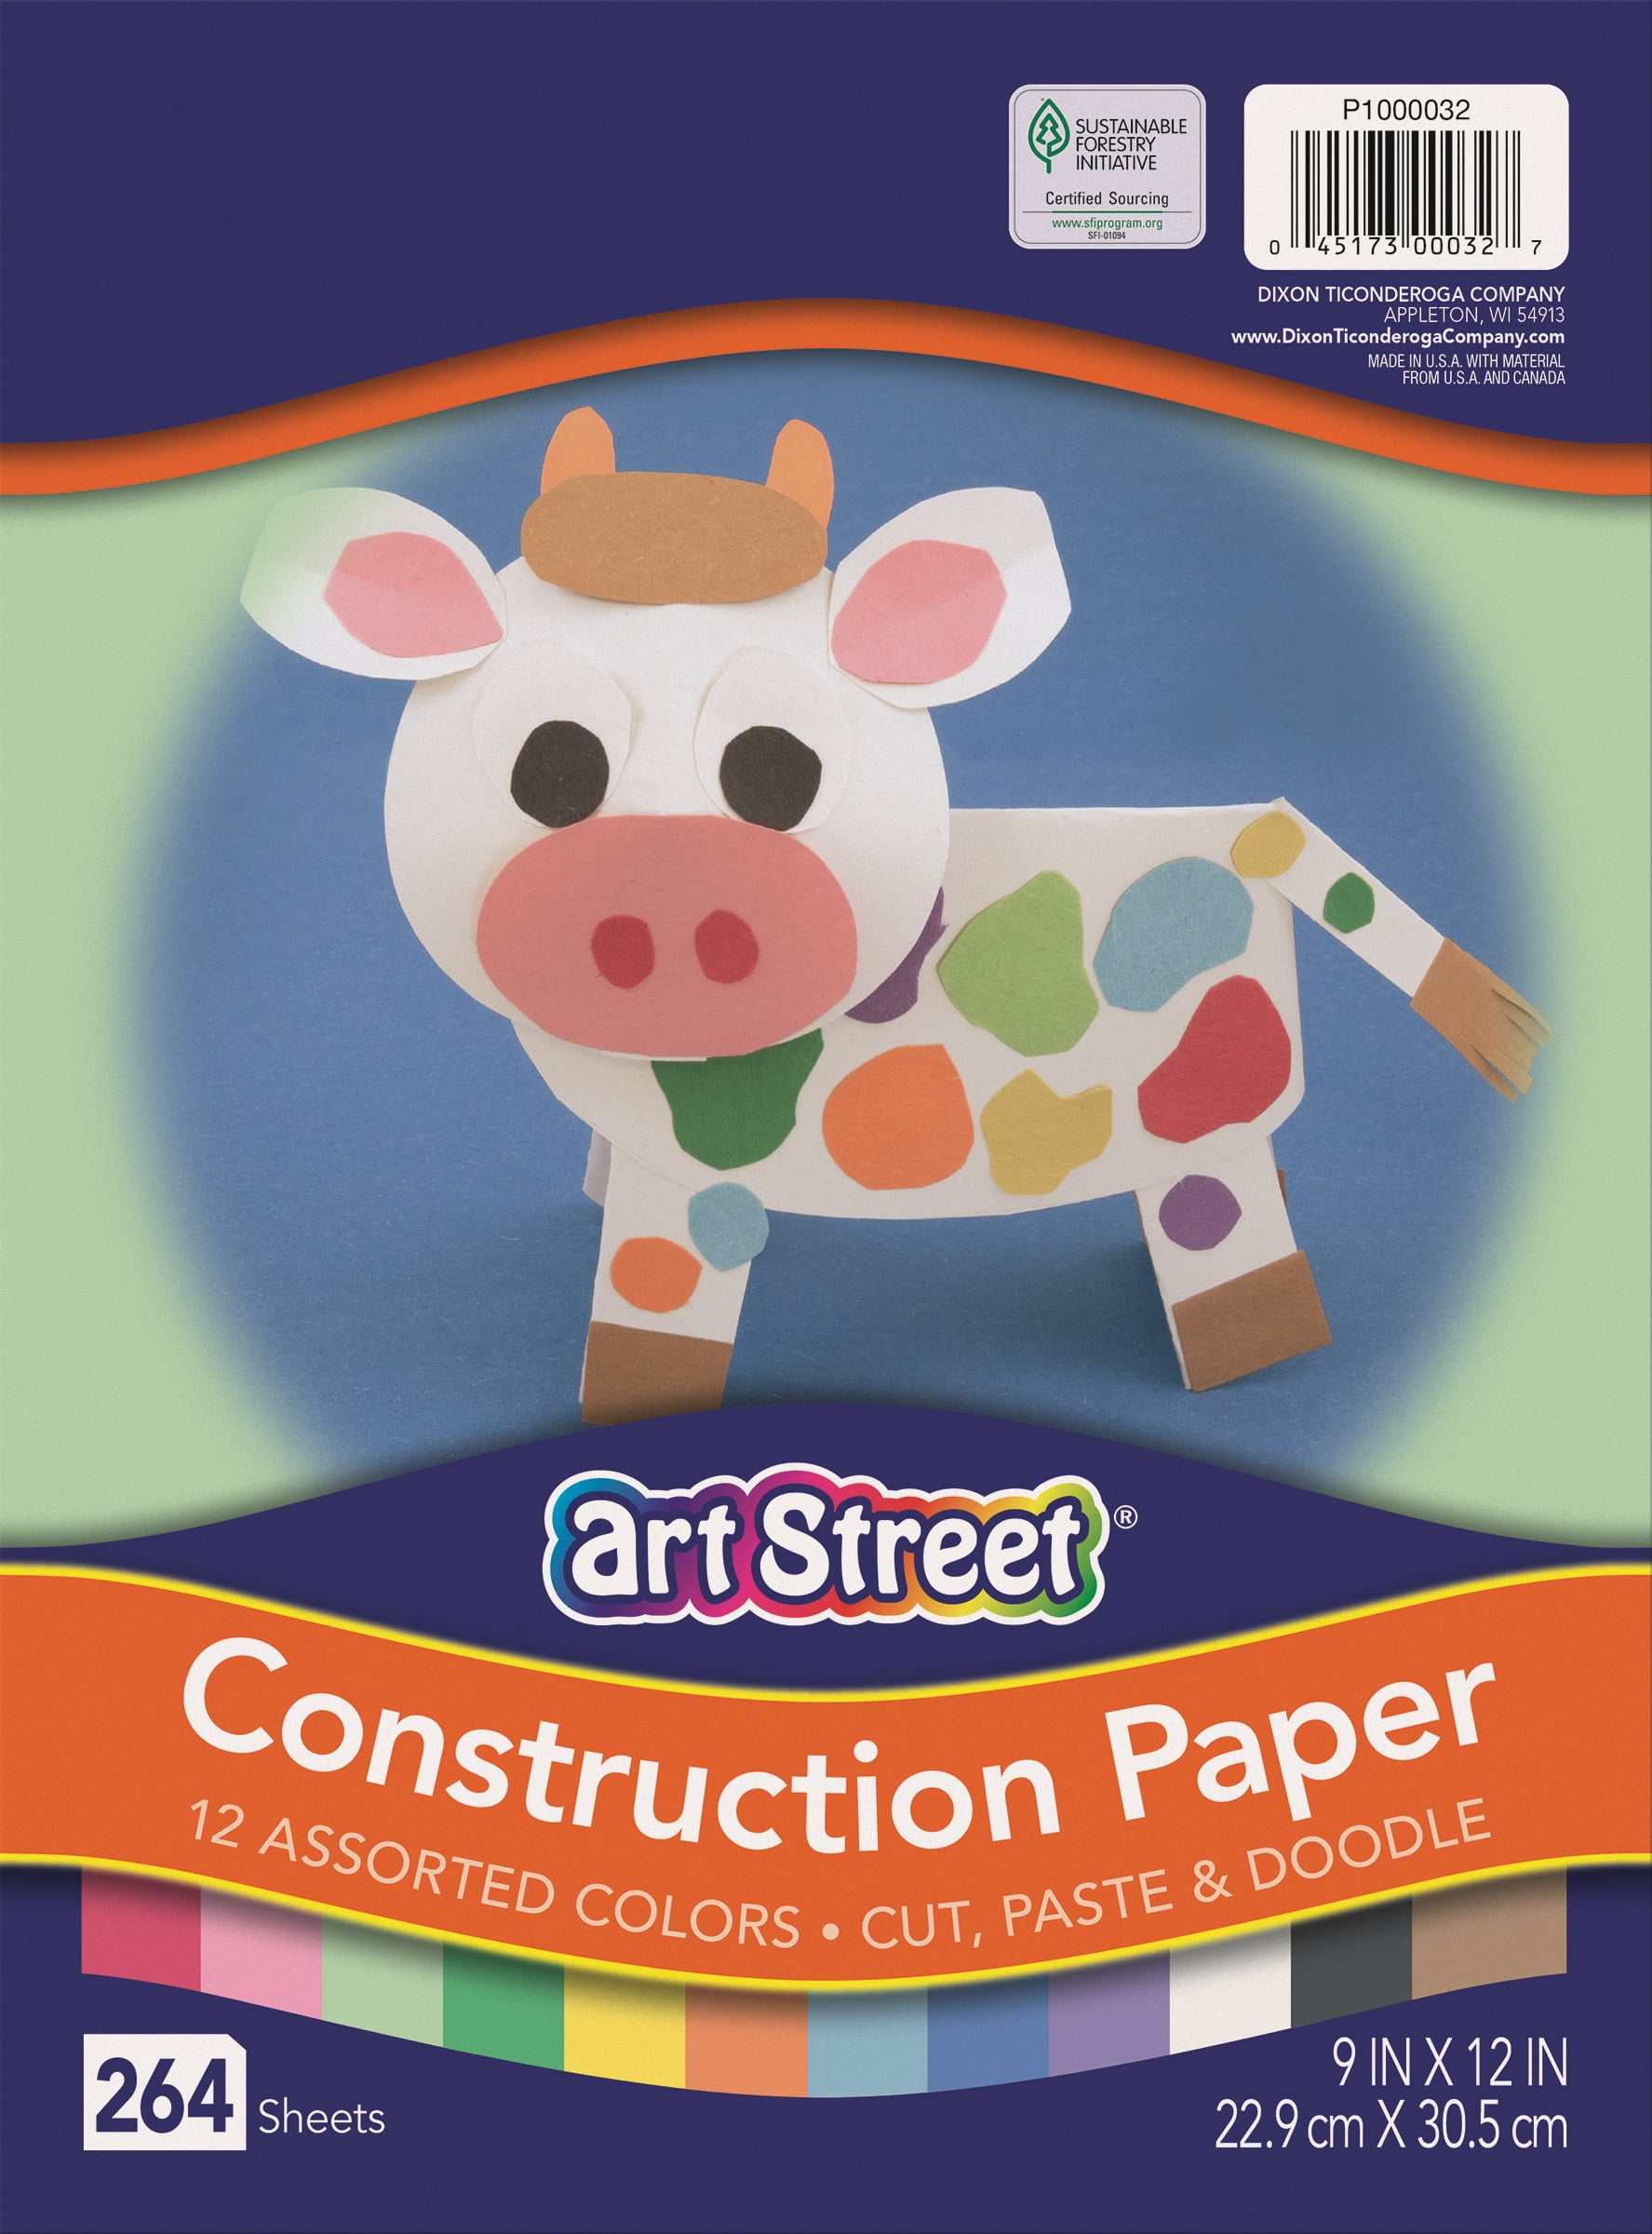 Prang (Formerly Art Street) 9 in x 12 in Construction Paper, 12 Assorted Colors, 264 Sheets